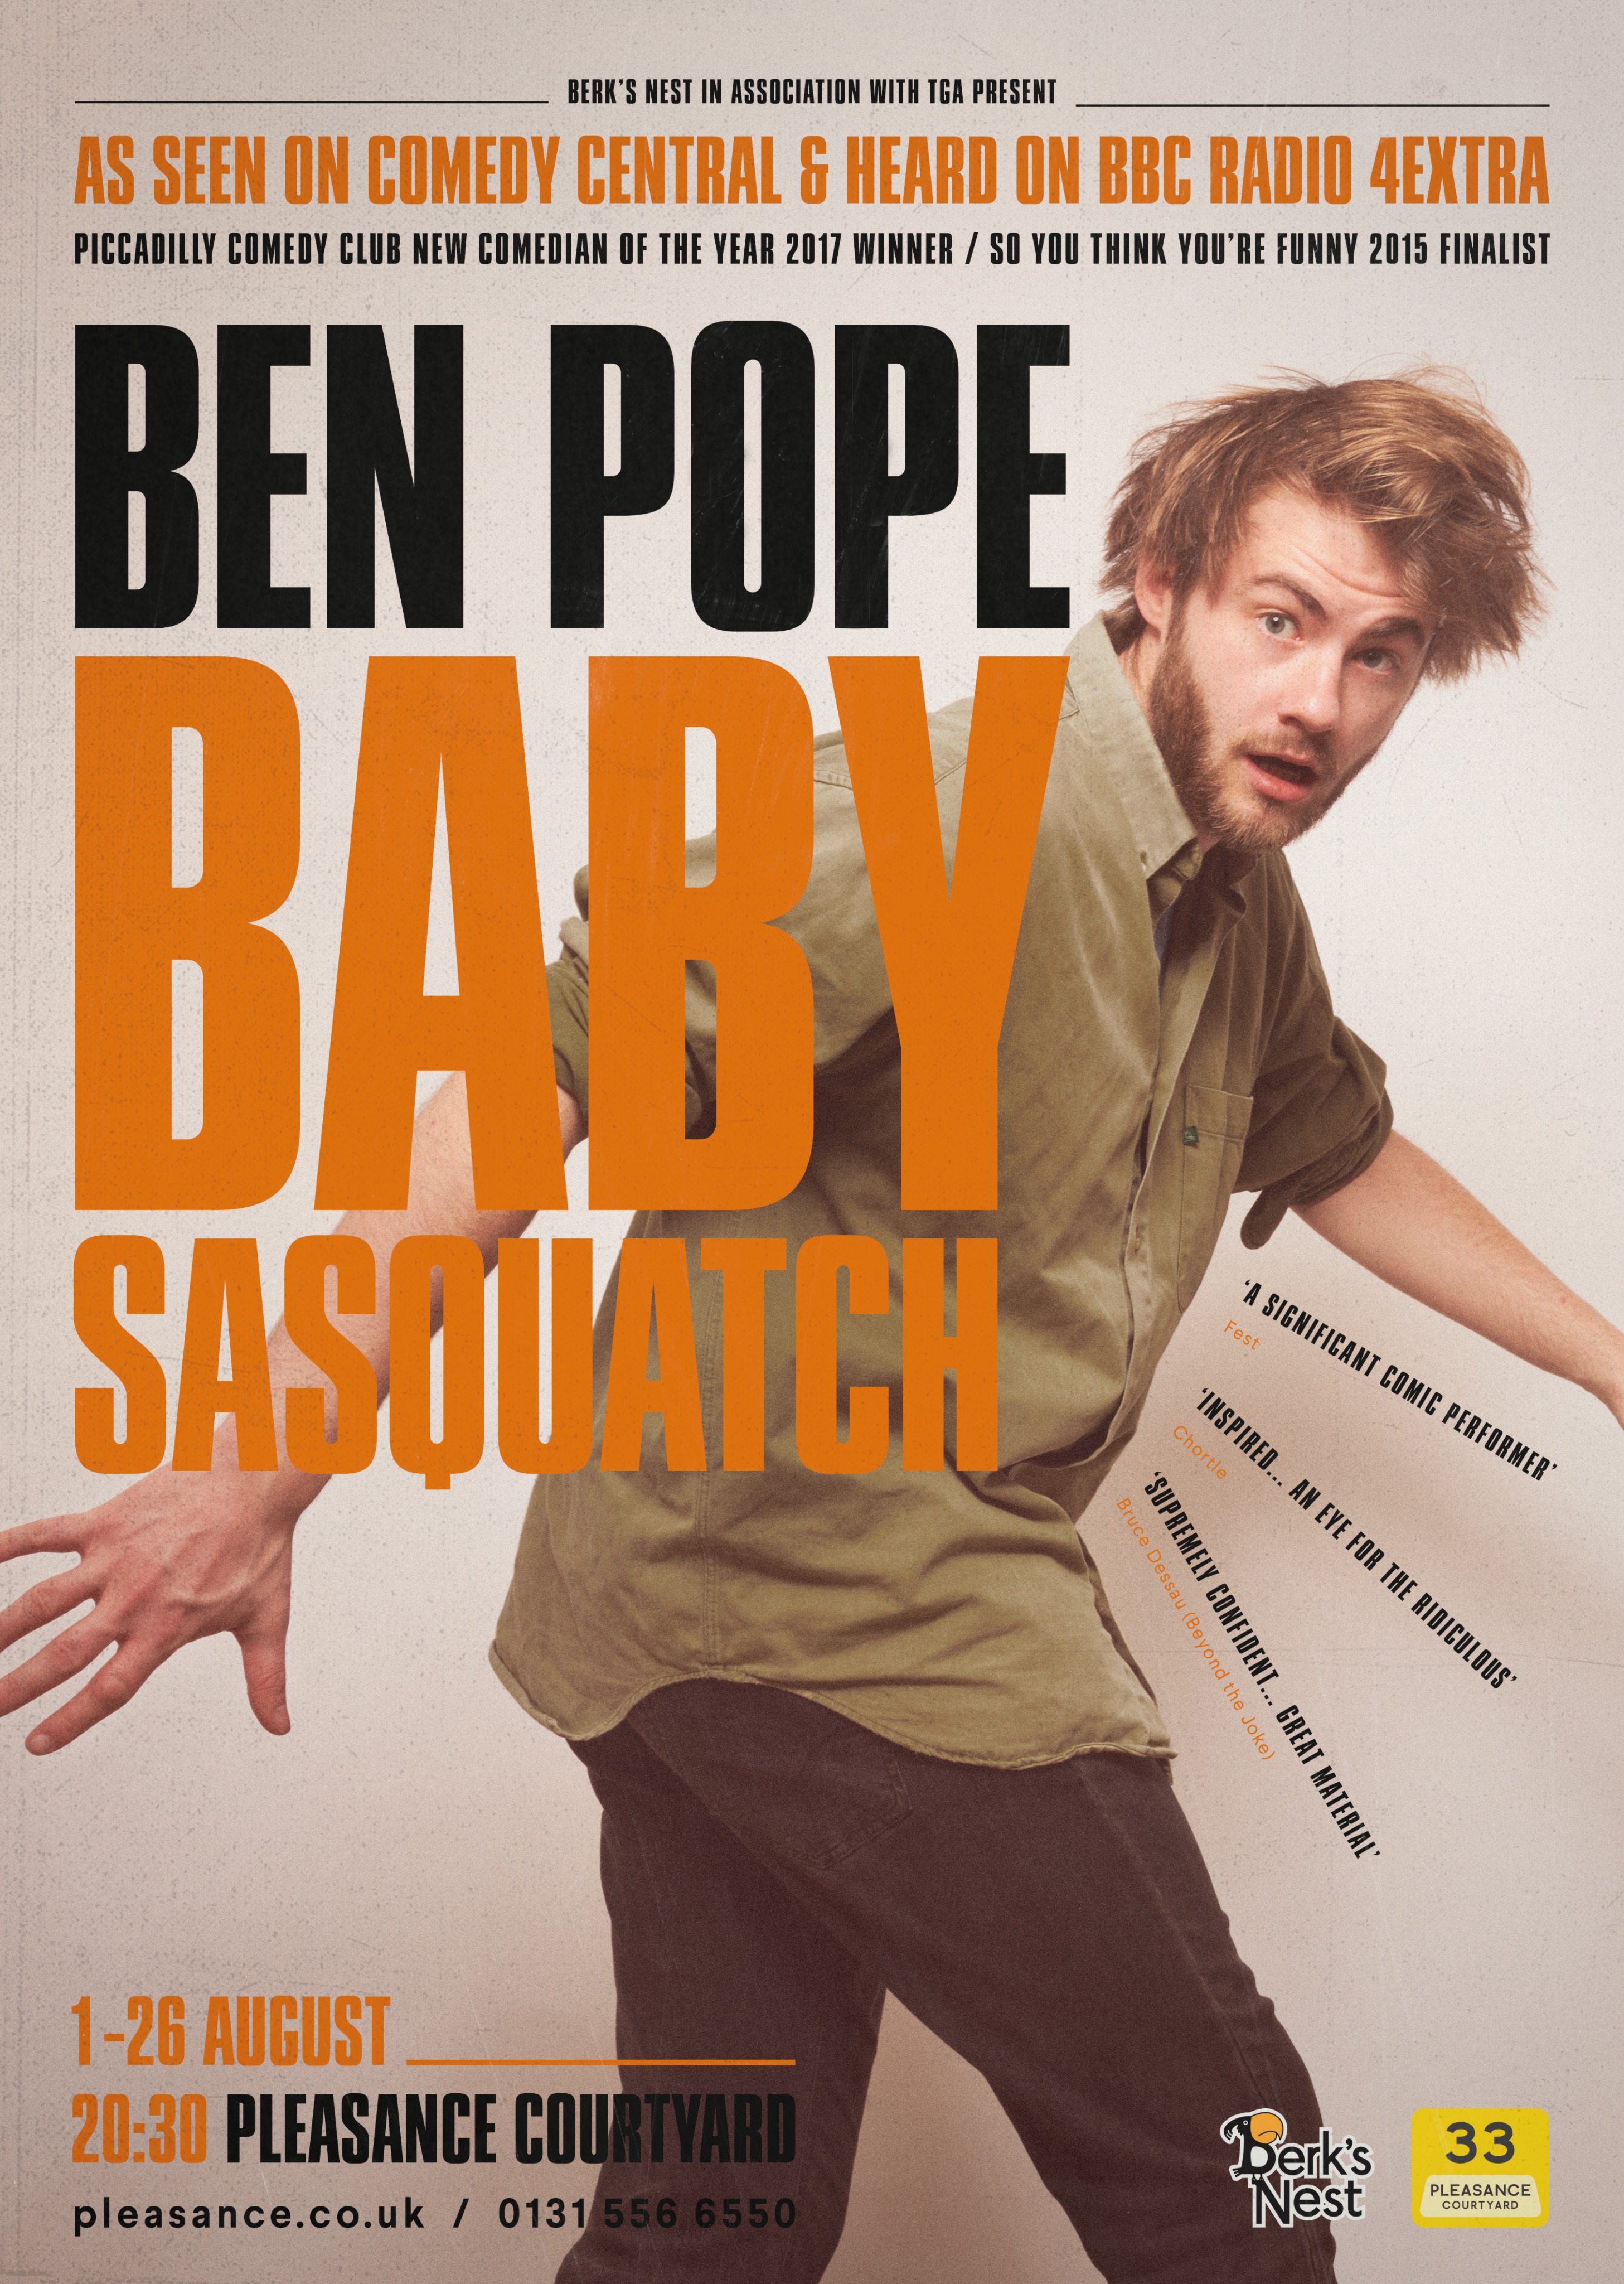 The poster for Ben Pope: Baby Sasquatch